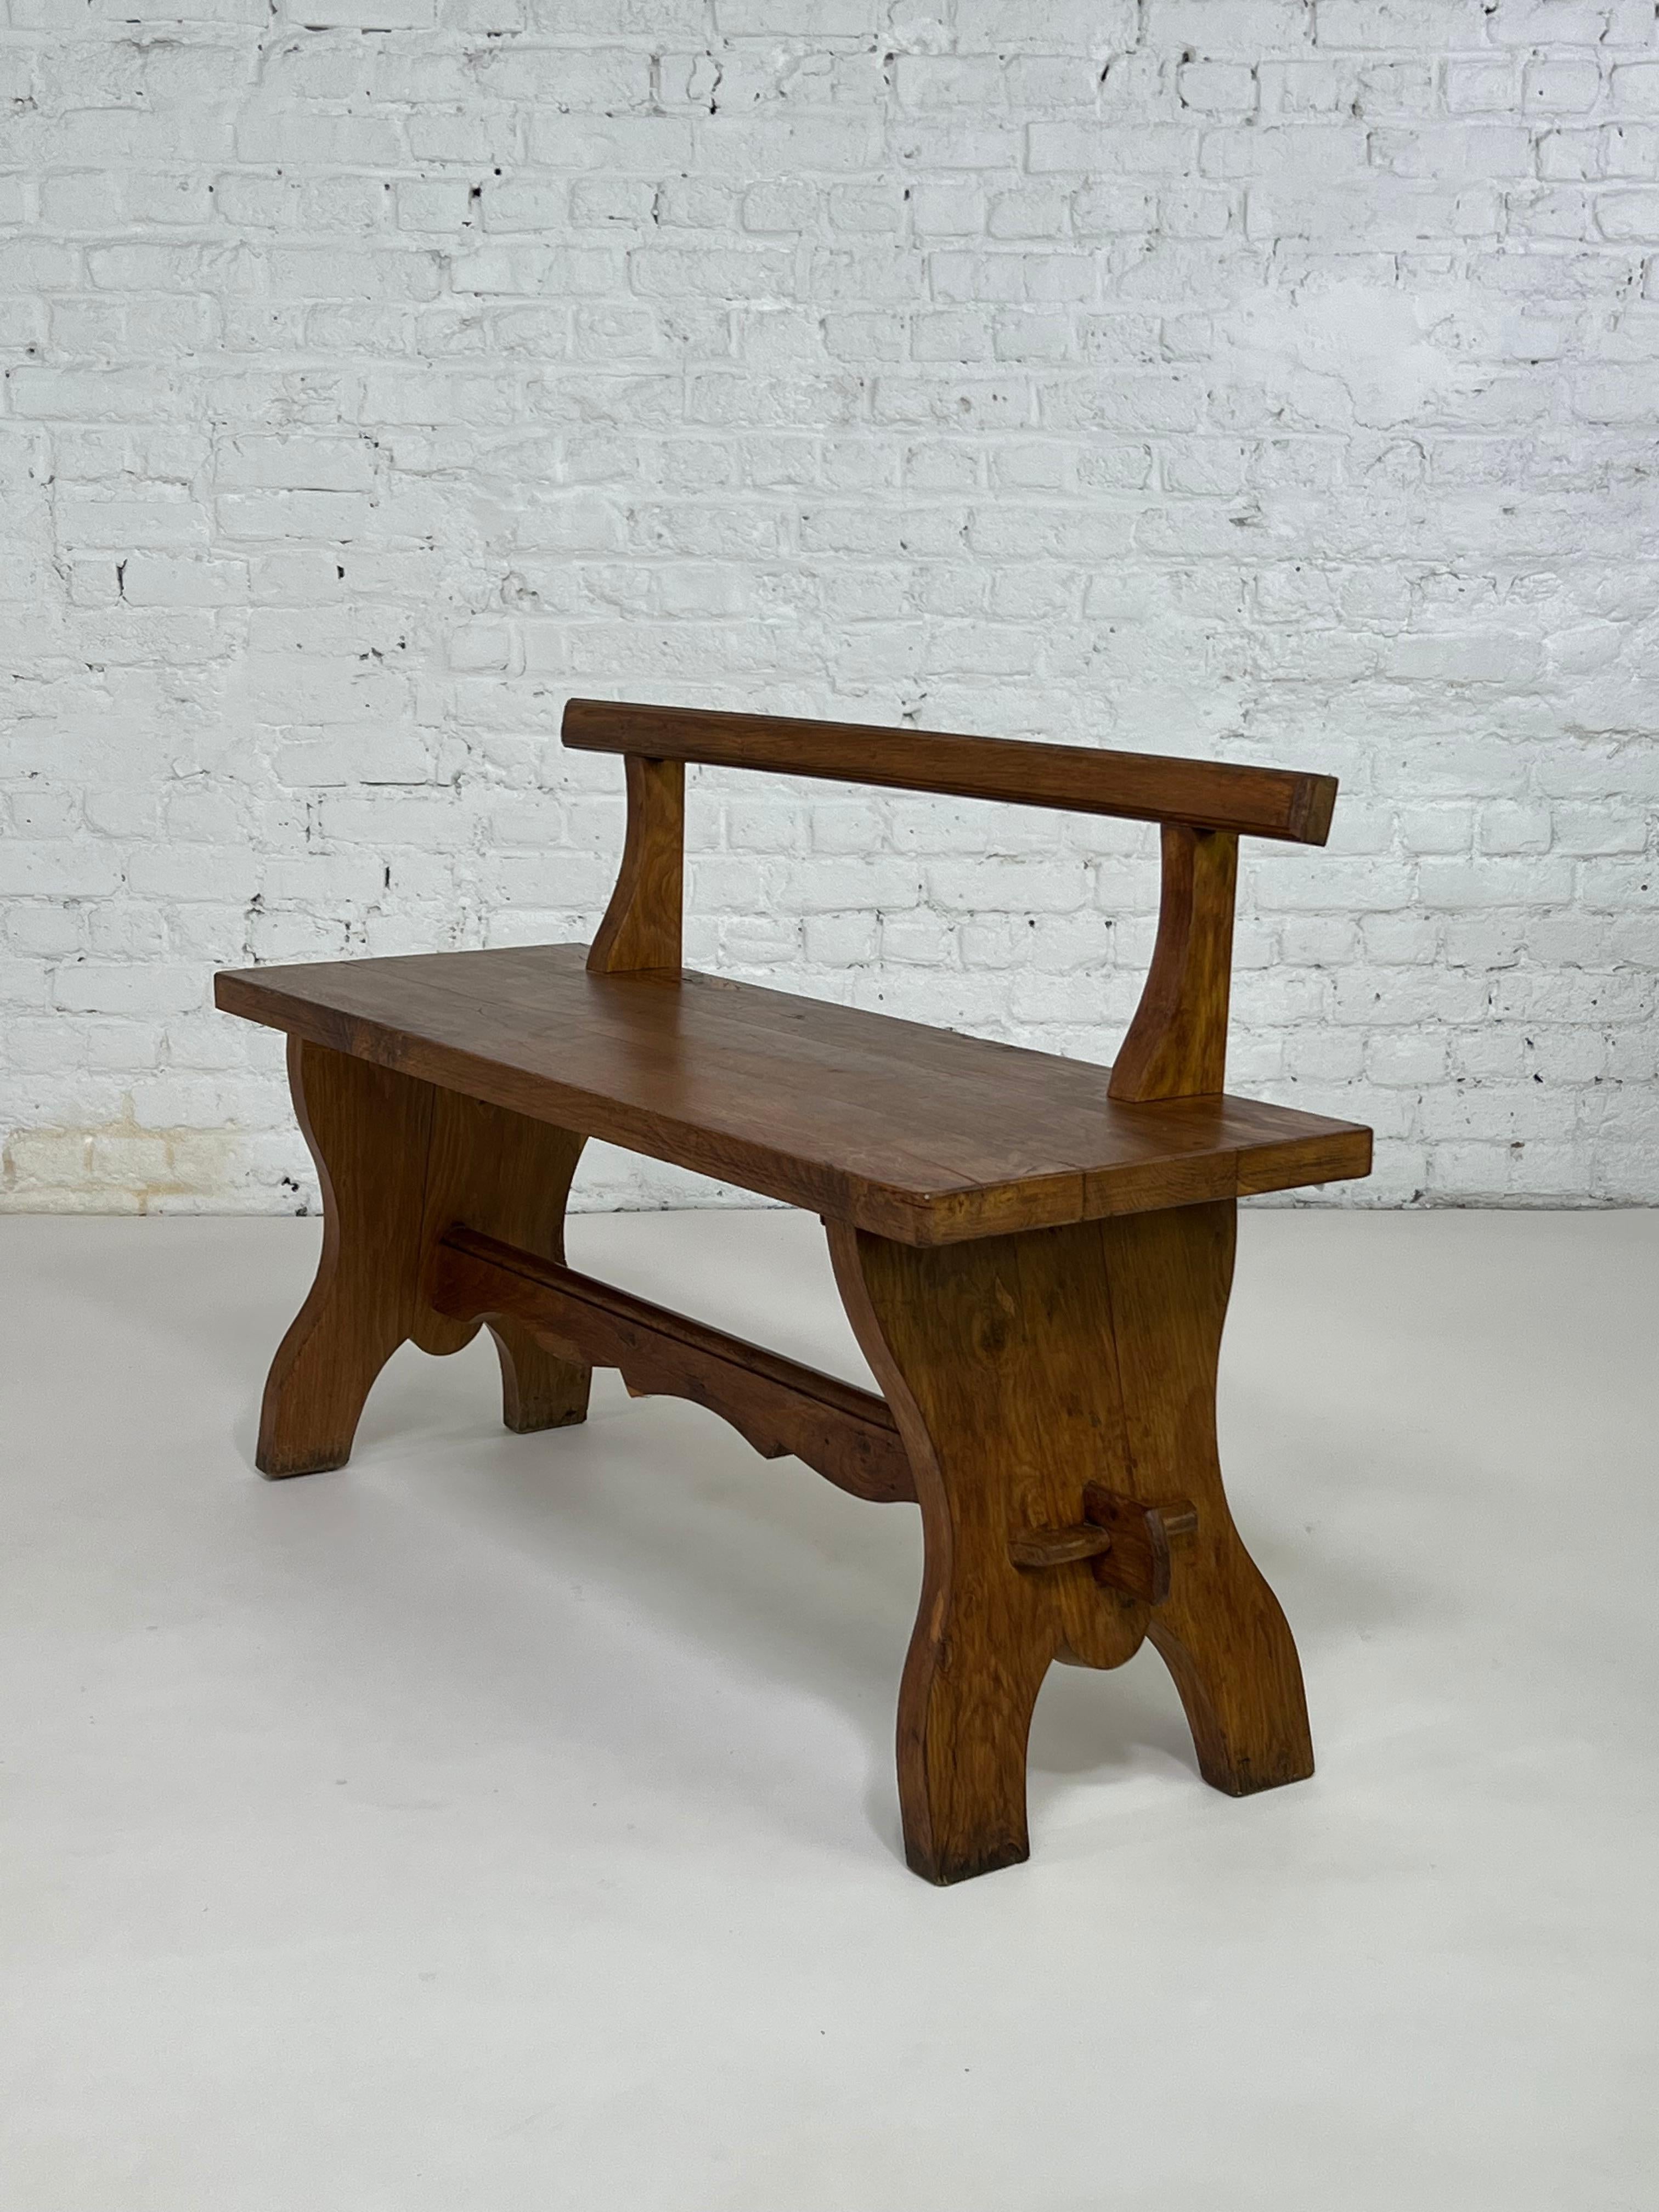 1950s French Design Oak Wooden Bench Seat 2